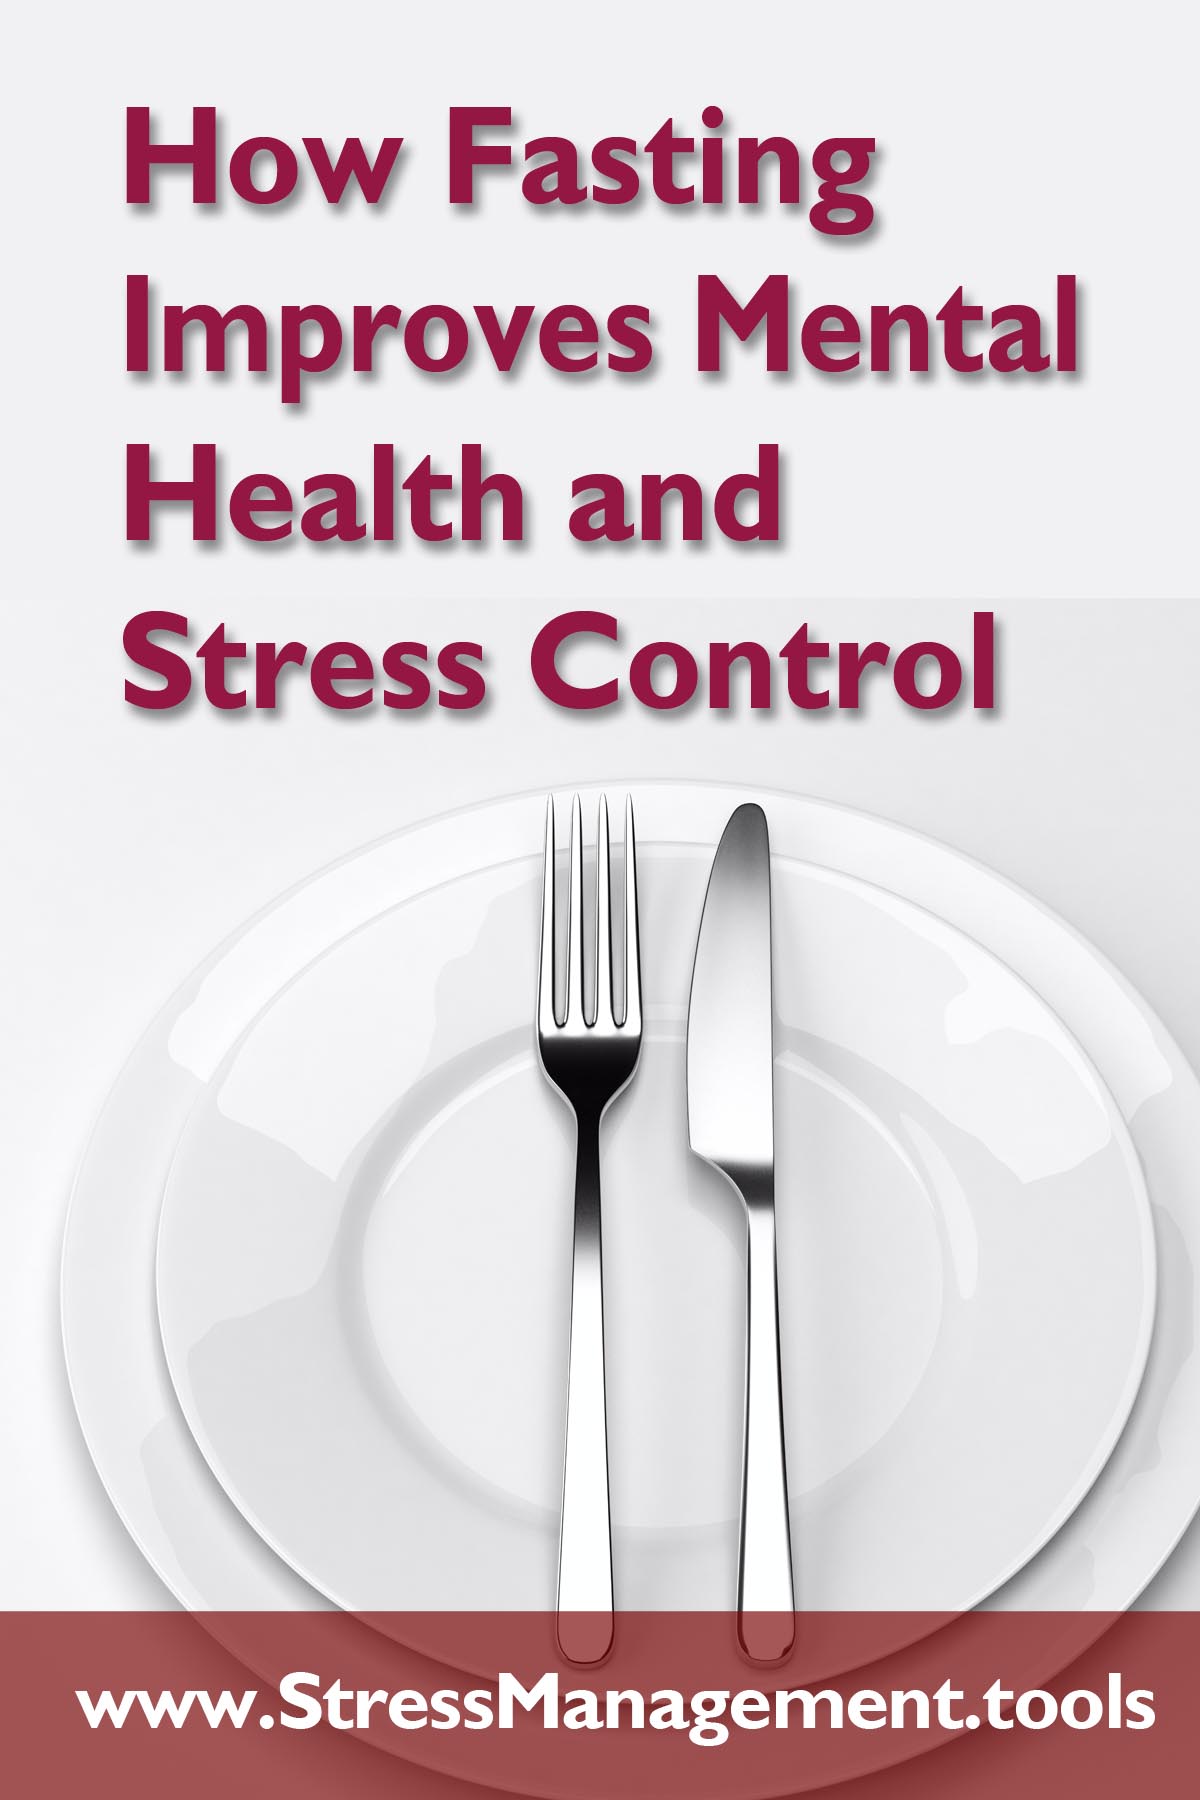 How Fasting Improves Mental Health and Stress Control